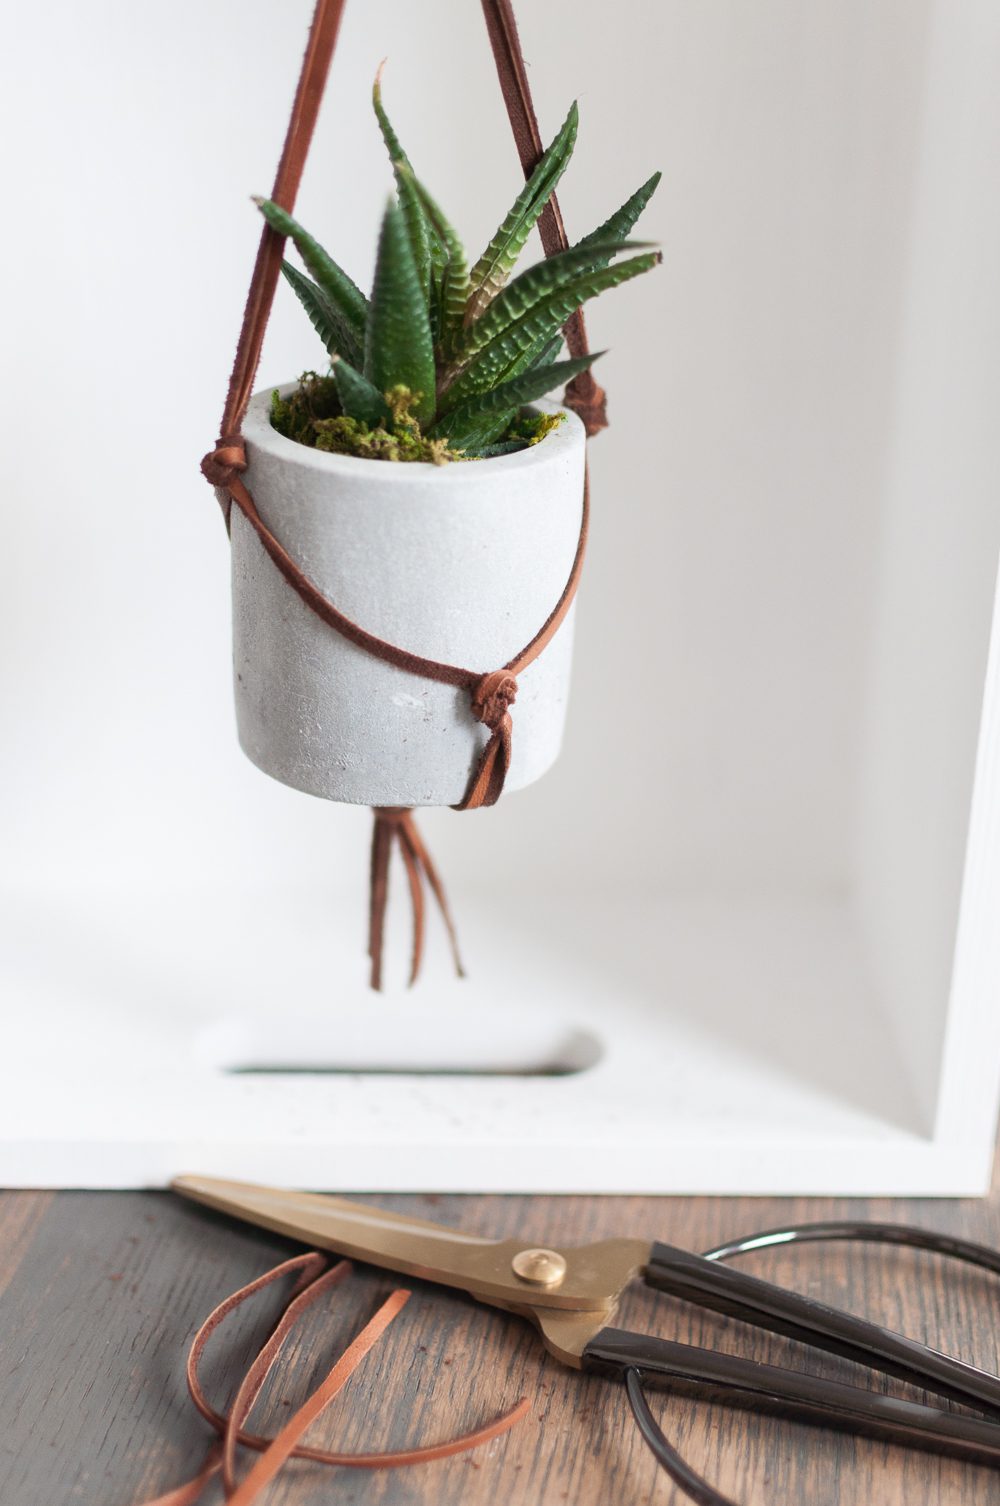 Follow this unique Leather Macrame Hanging Succulent Planter Tutorial to bring stylish natural elements into your home. Customize this Succulent Planter to fit any decor style!